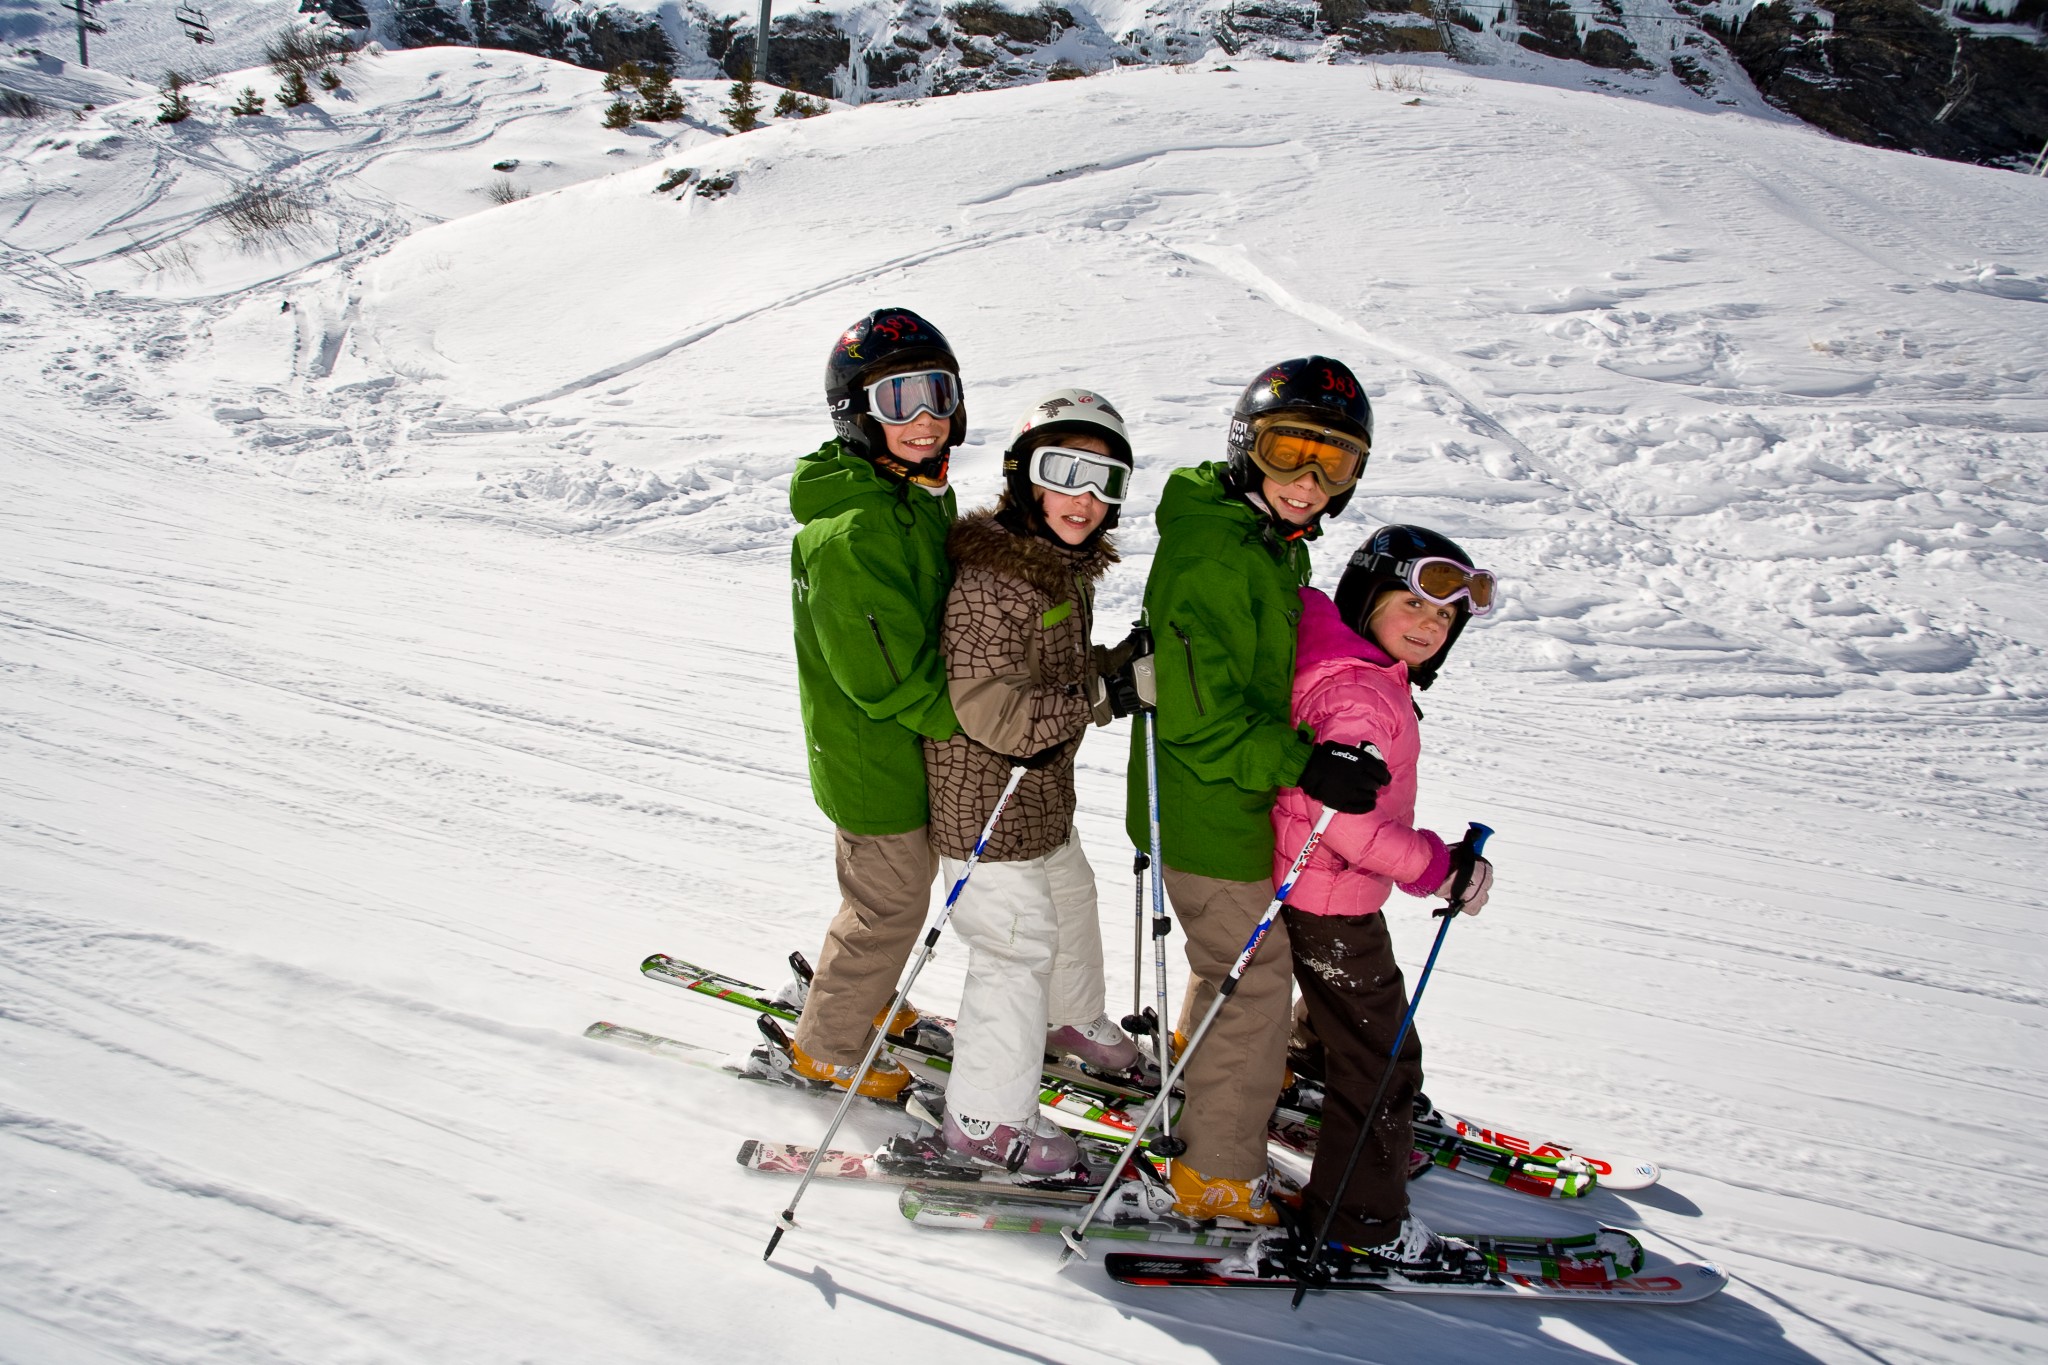 The Best Ski Resorts For Families